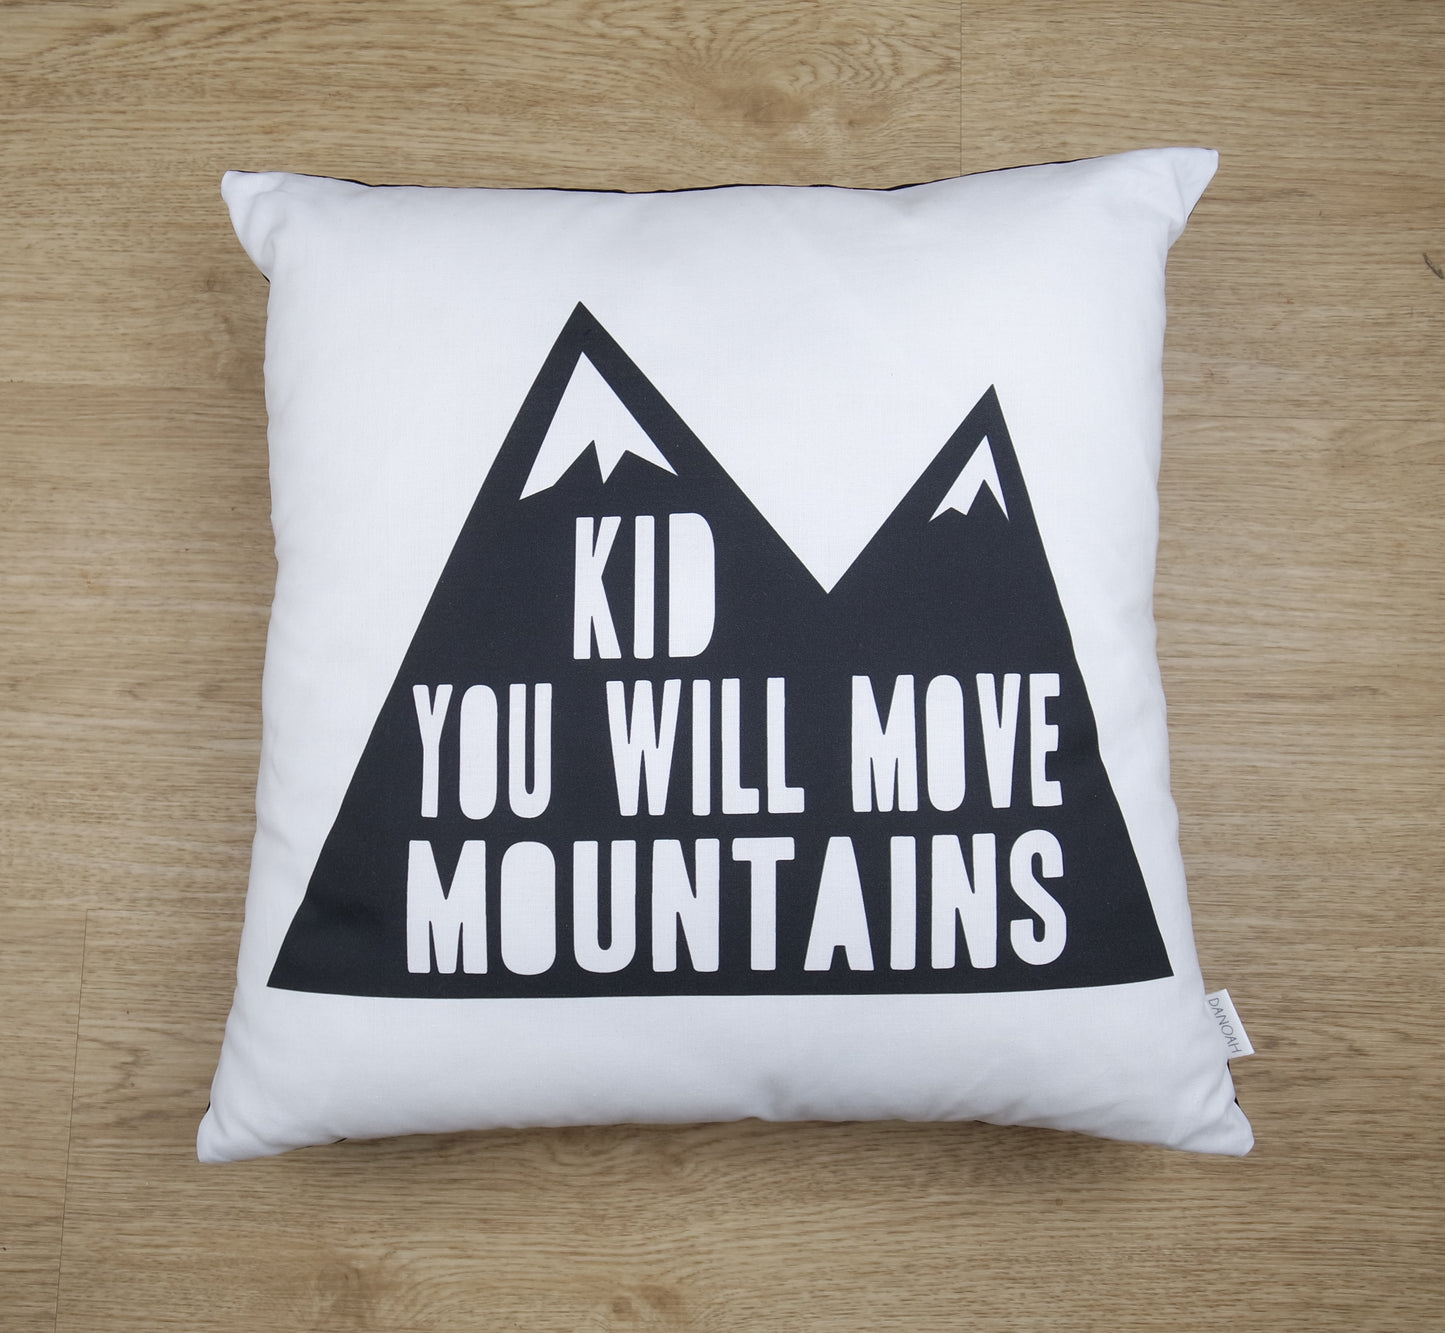 Kid You Will Move Mountains Cushion Cover